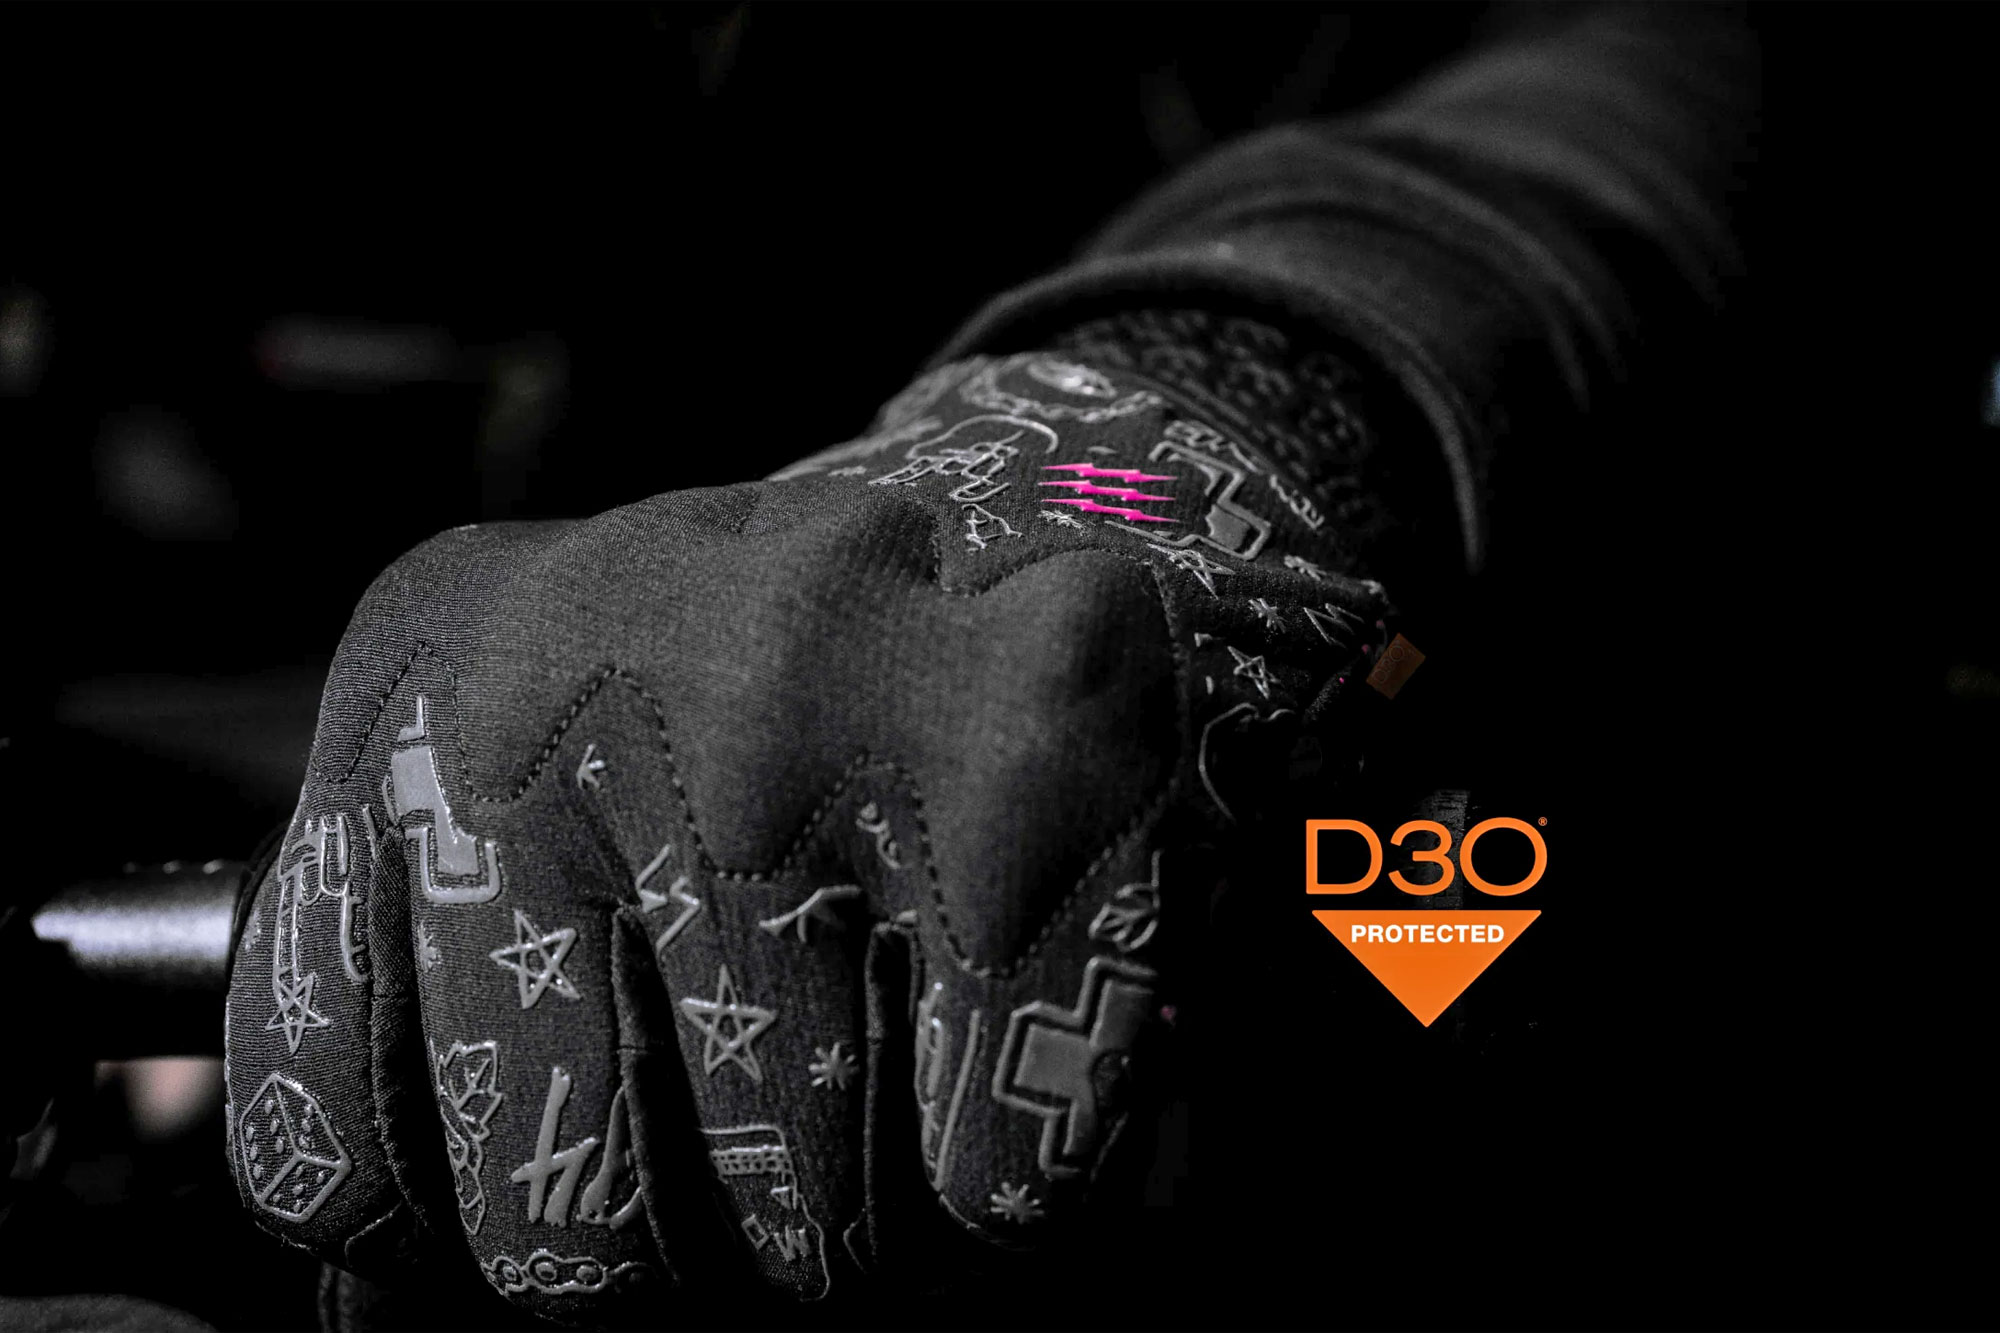 Muc-Off D3O Rider Gloves deliver impact protection for aggressive mountain biking